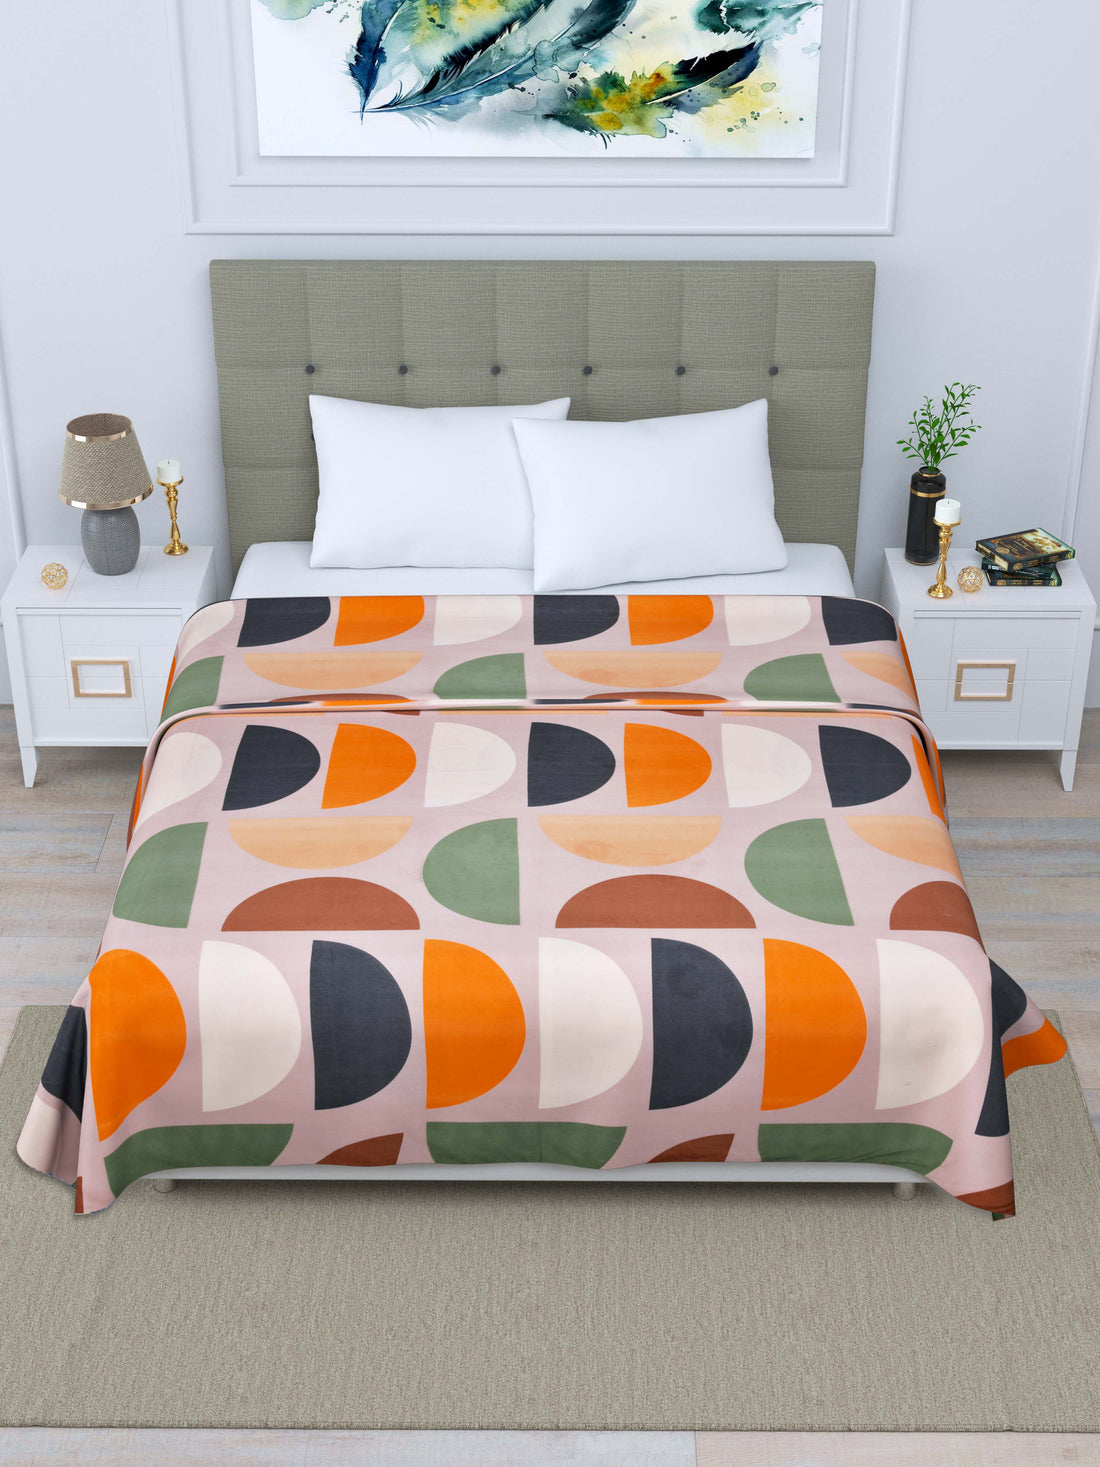 Dohar-Double Bed-Colored Half Circles